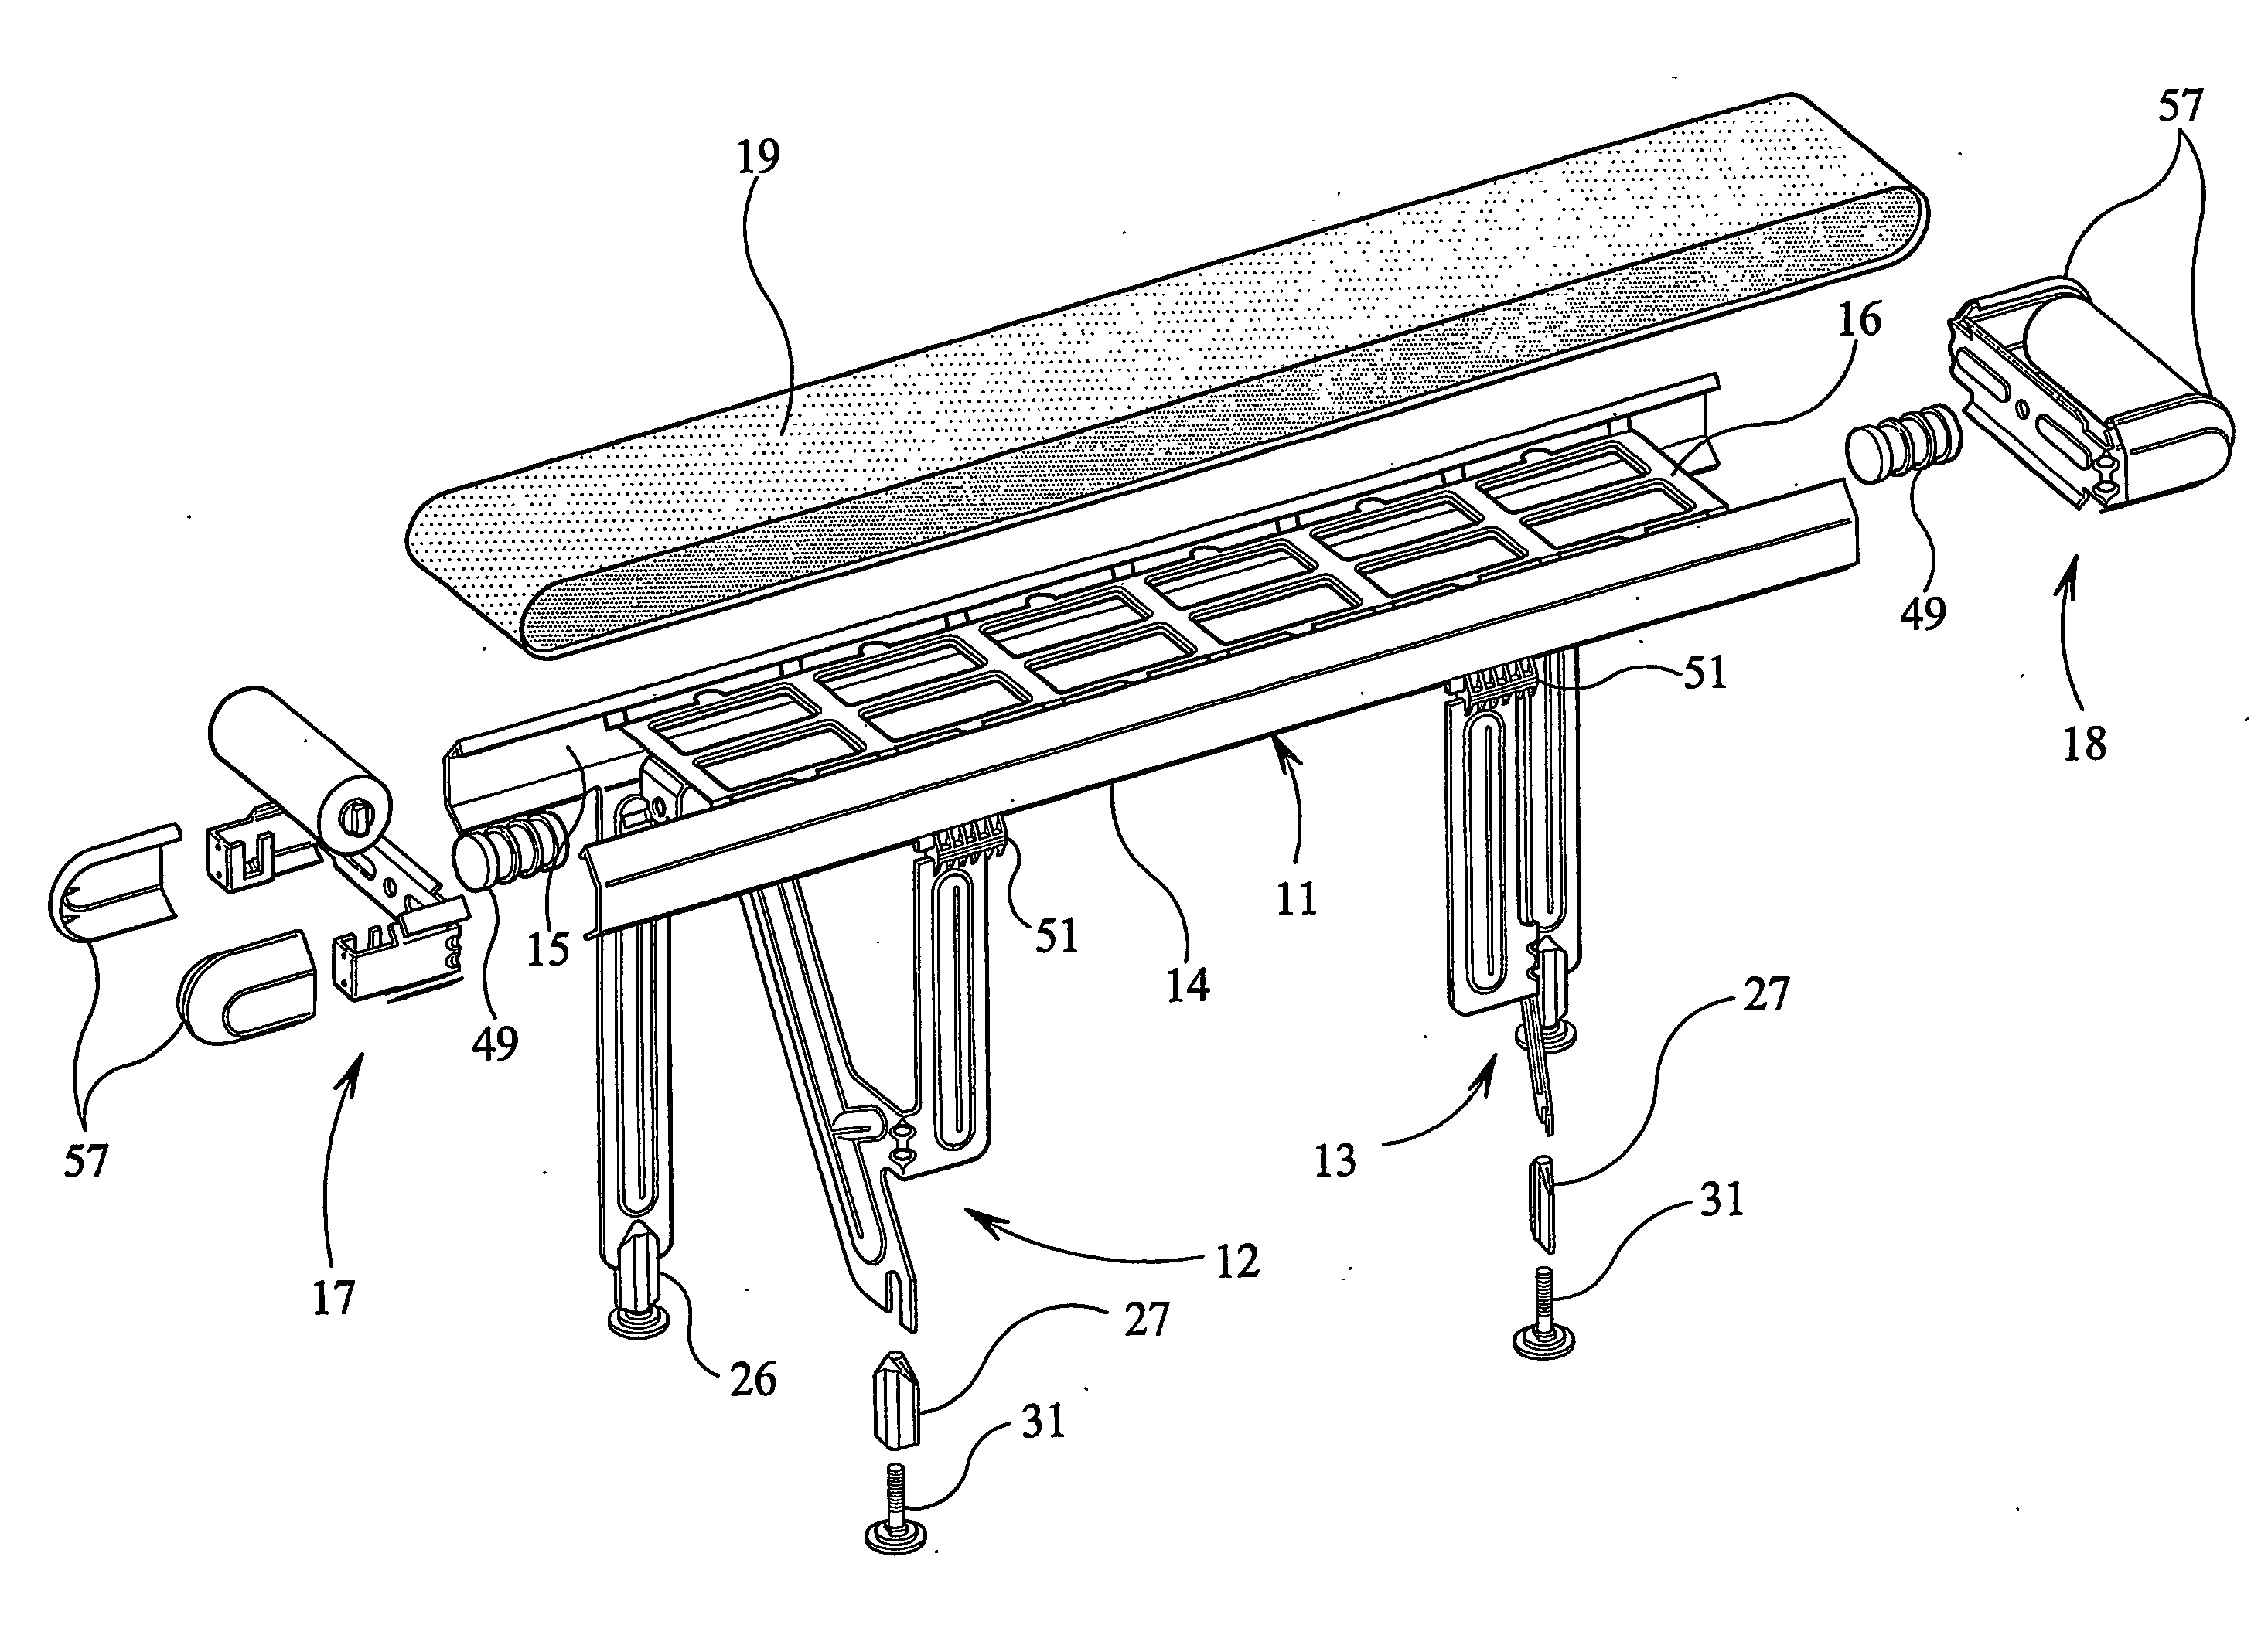 Belt conveyor with a supporting platform formed from a single sheet of metal